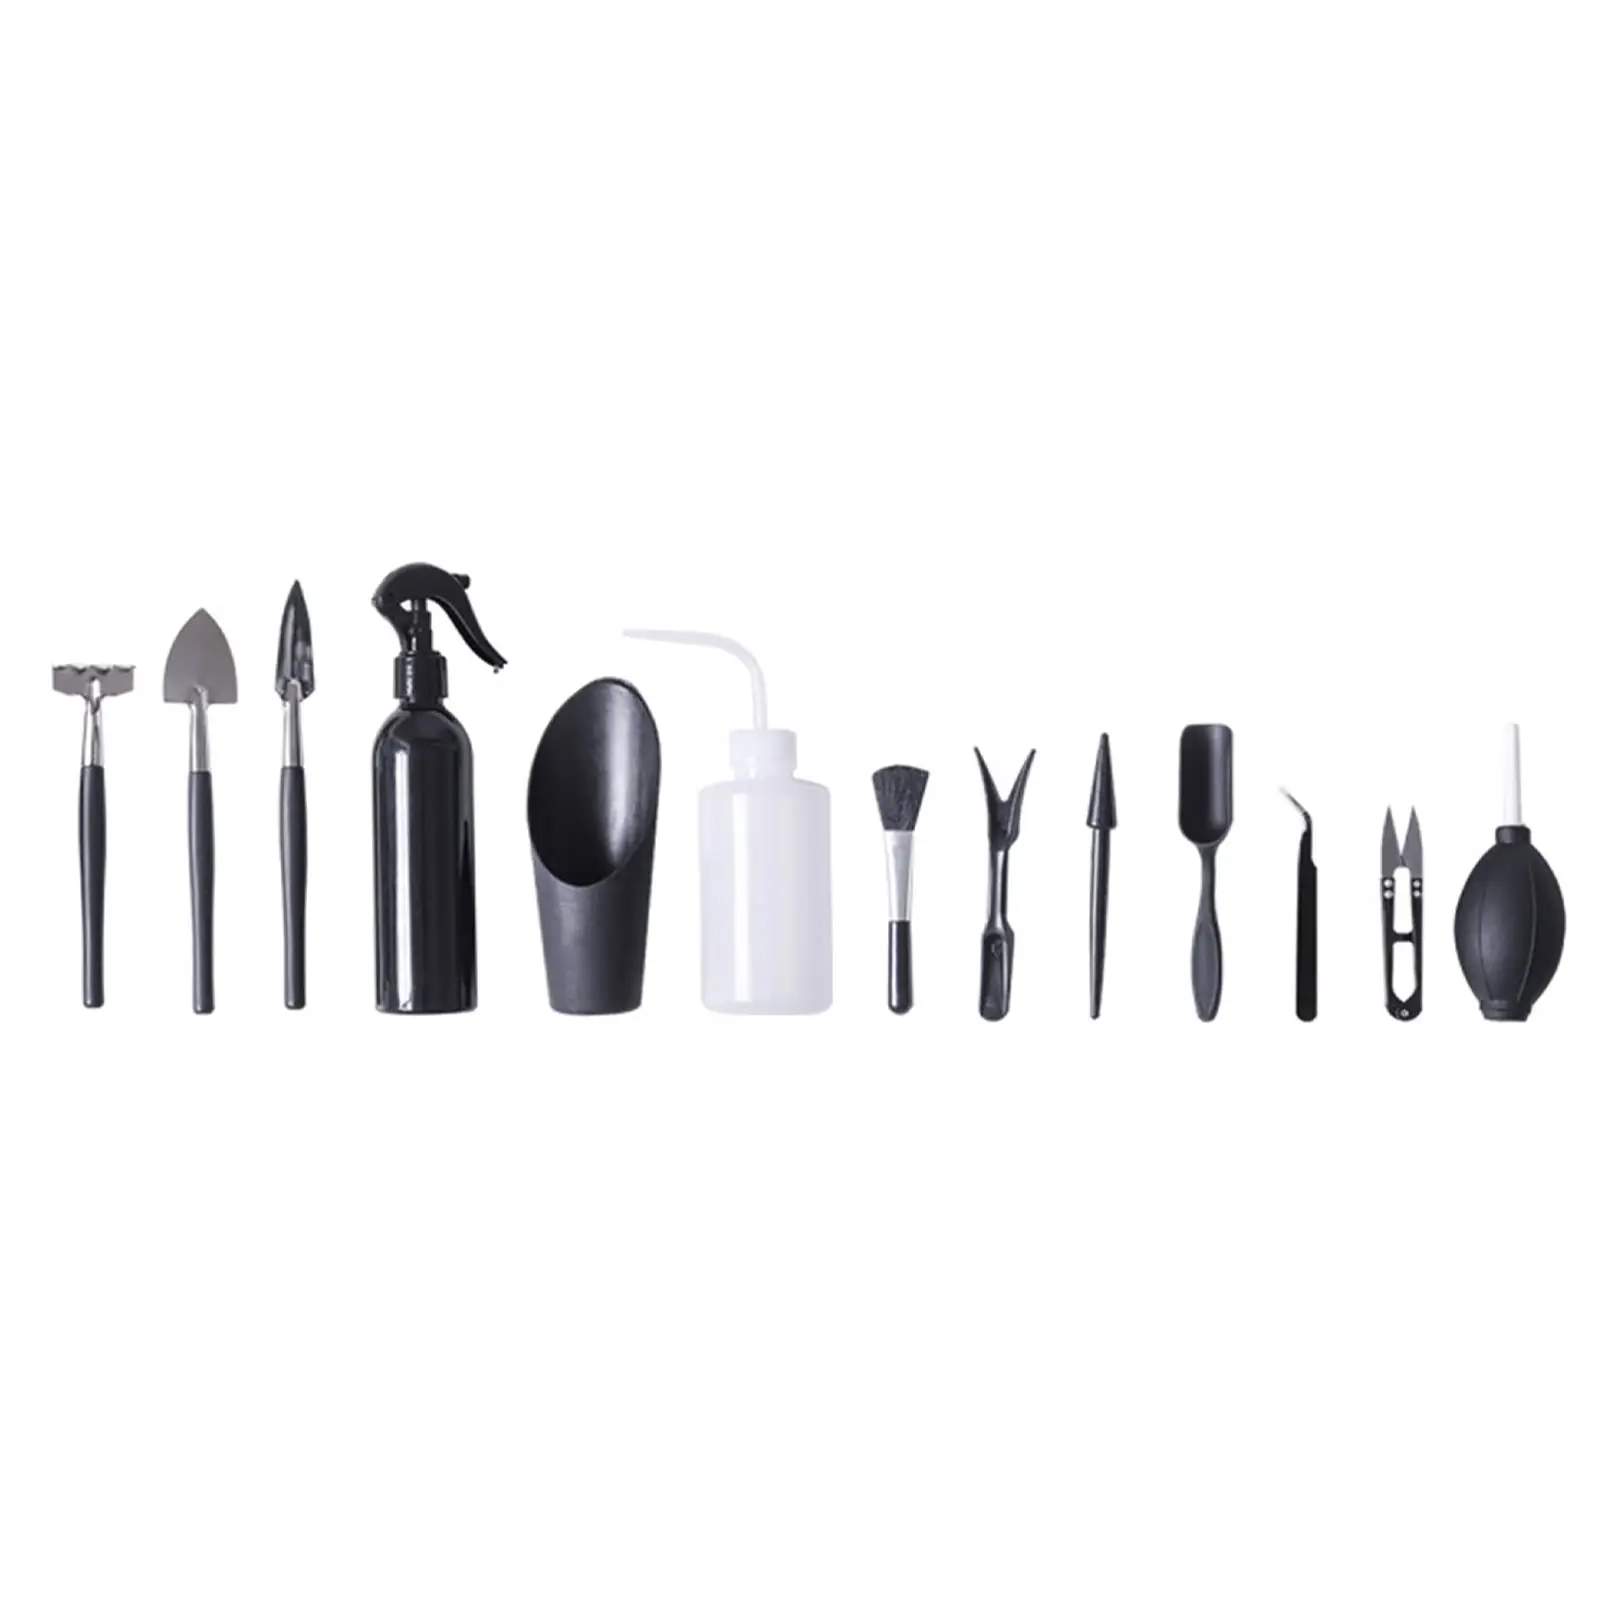 Succulent Hand Transplanting Tools Kit 13 Pieces for Indoor Garden, Potting Accessory Stainless Steel, PP Materials Professional